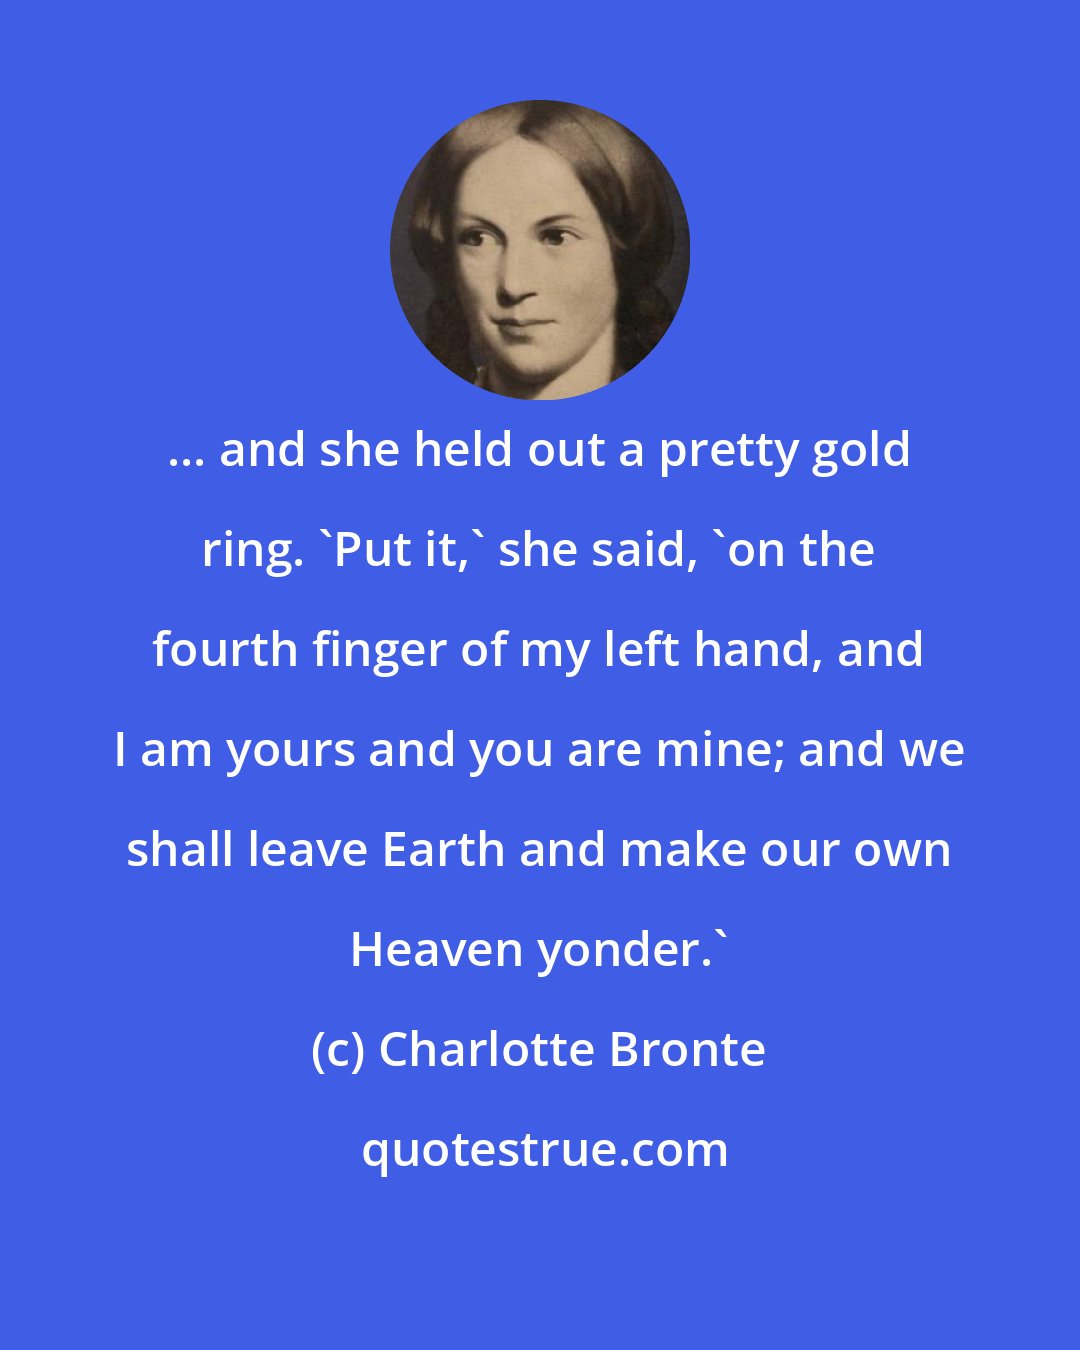 Charlotte Bronte: ... and she held out a pretty gold ring. 'Put it,' she said, 'on the fourth finger of my left hand, and I am yours and you are mine; and we shall leave Earth and make our own Heaven yonder.'